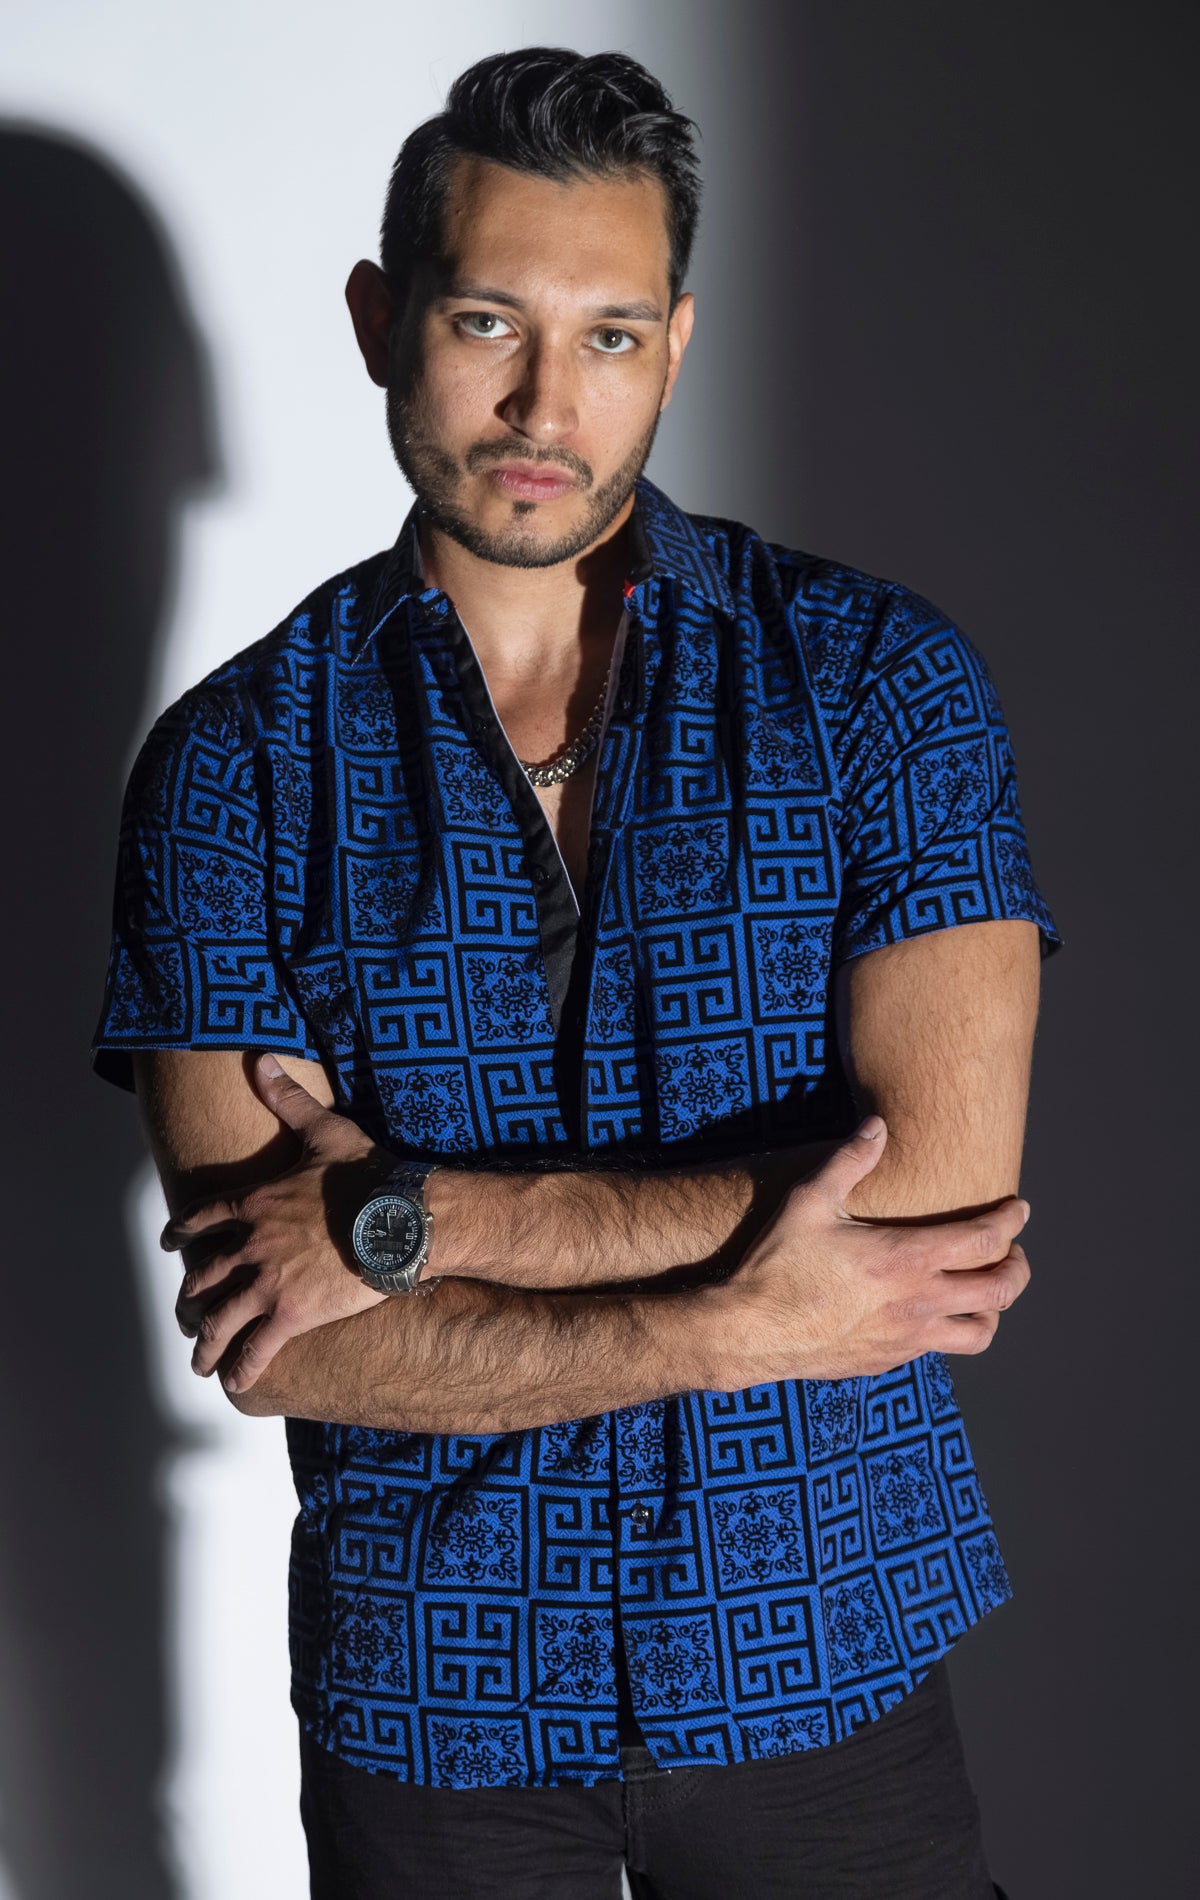 Roman collection blue and black men's button up short sleeves shirt.